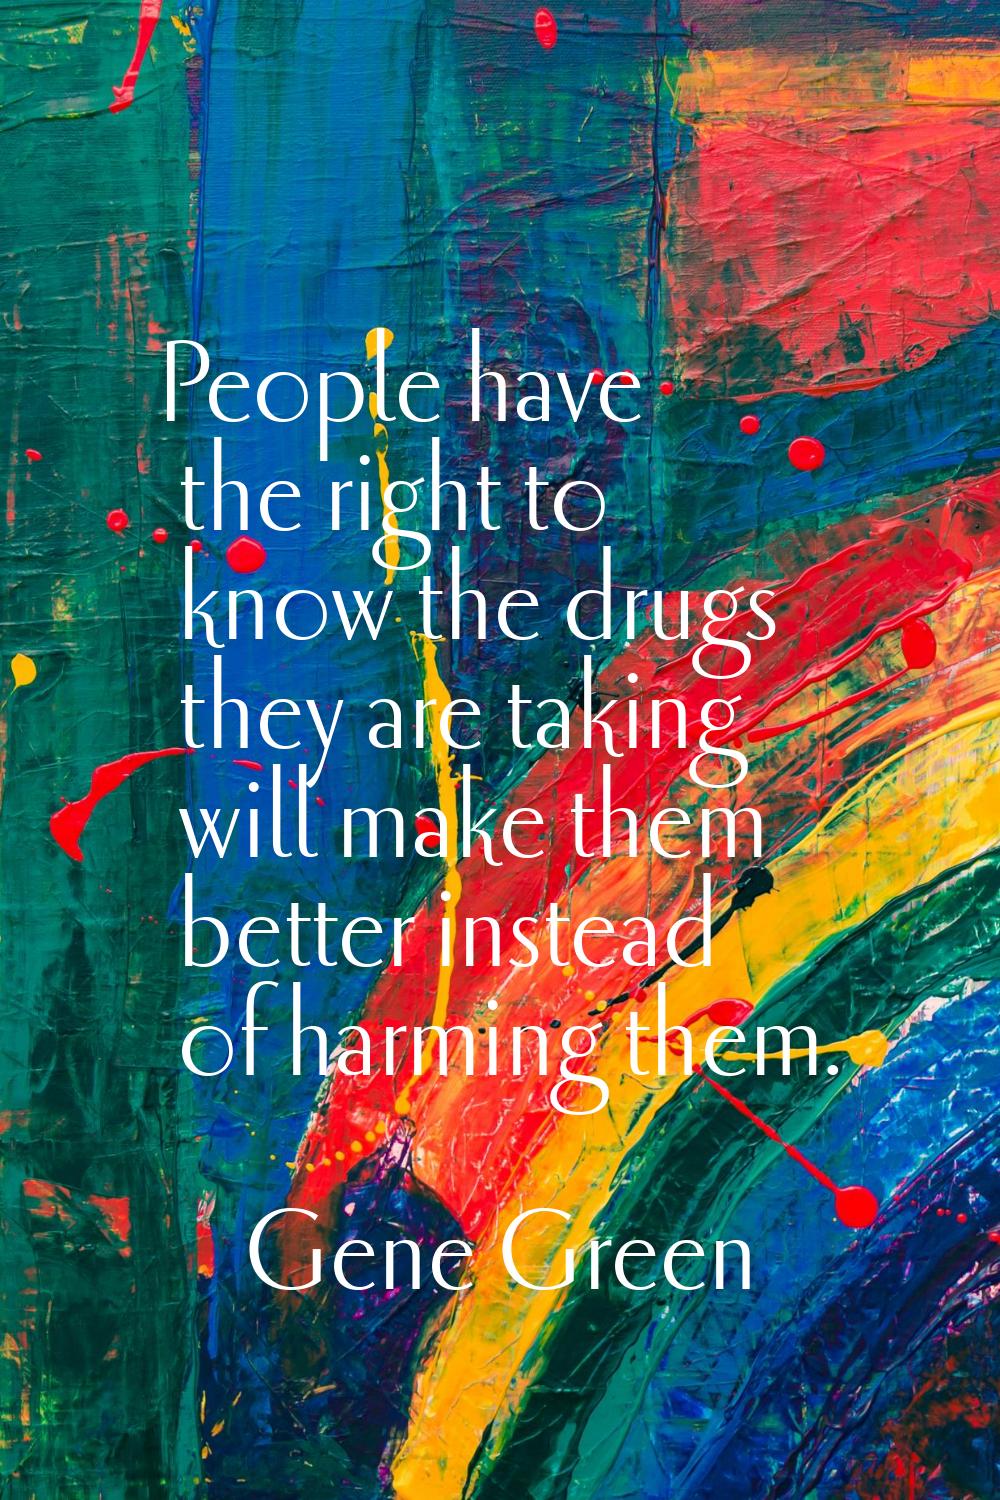 People have the right to know the drugs they are taking will make them better instead of harming th